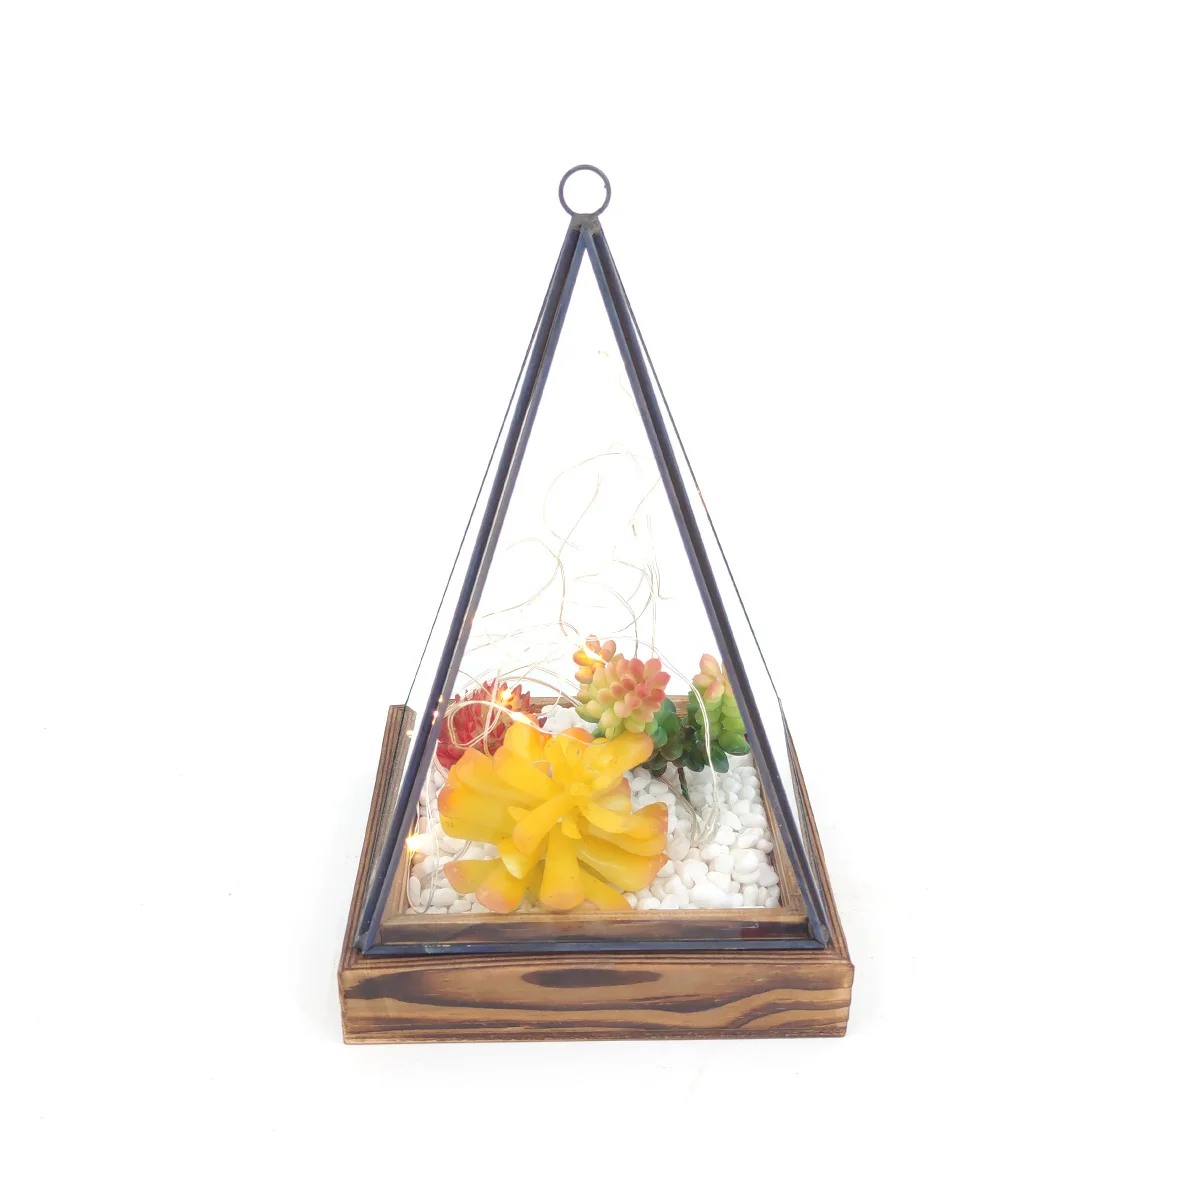 Geometric triangle clear glass indoor succulent plants hanging container terrarium decor with wood base for sale